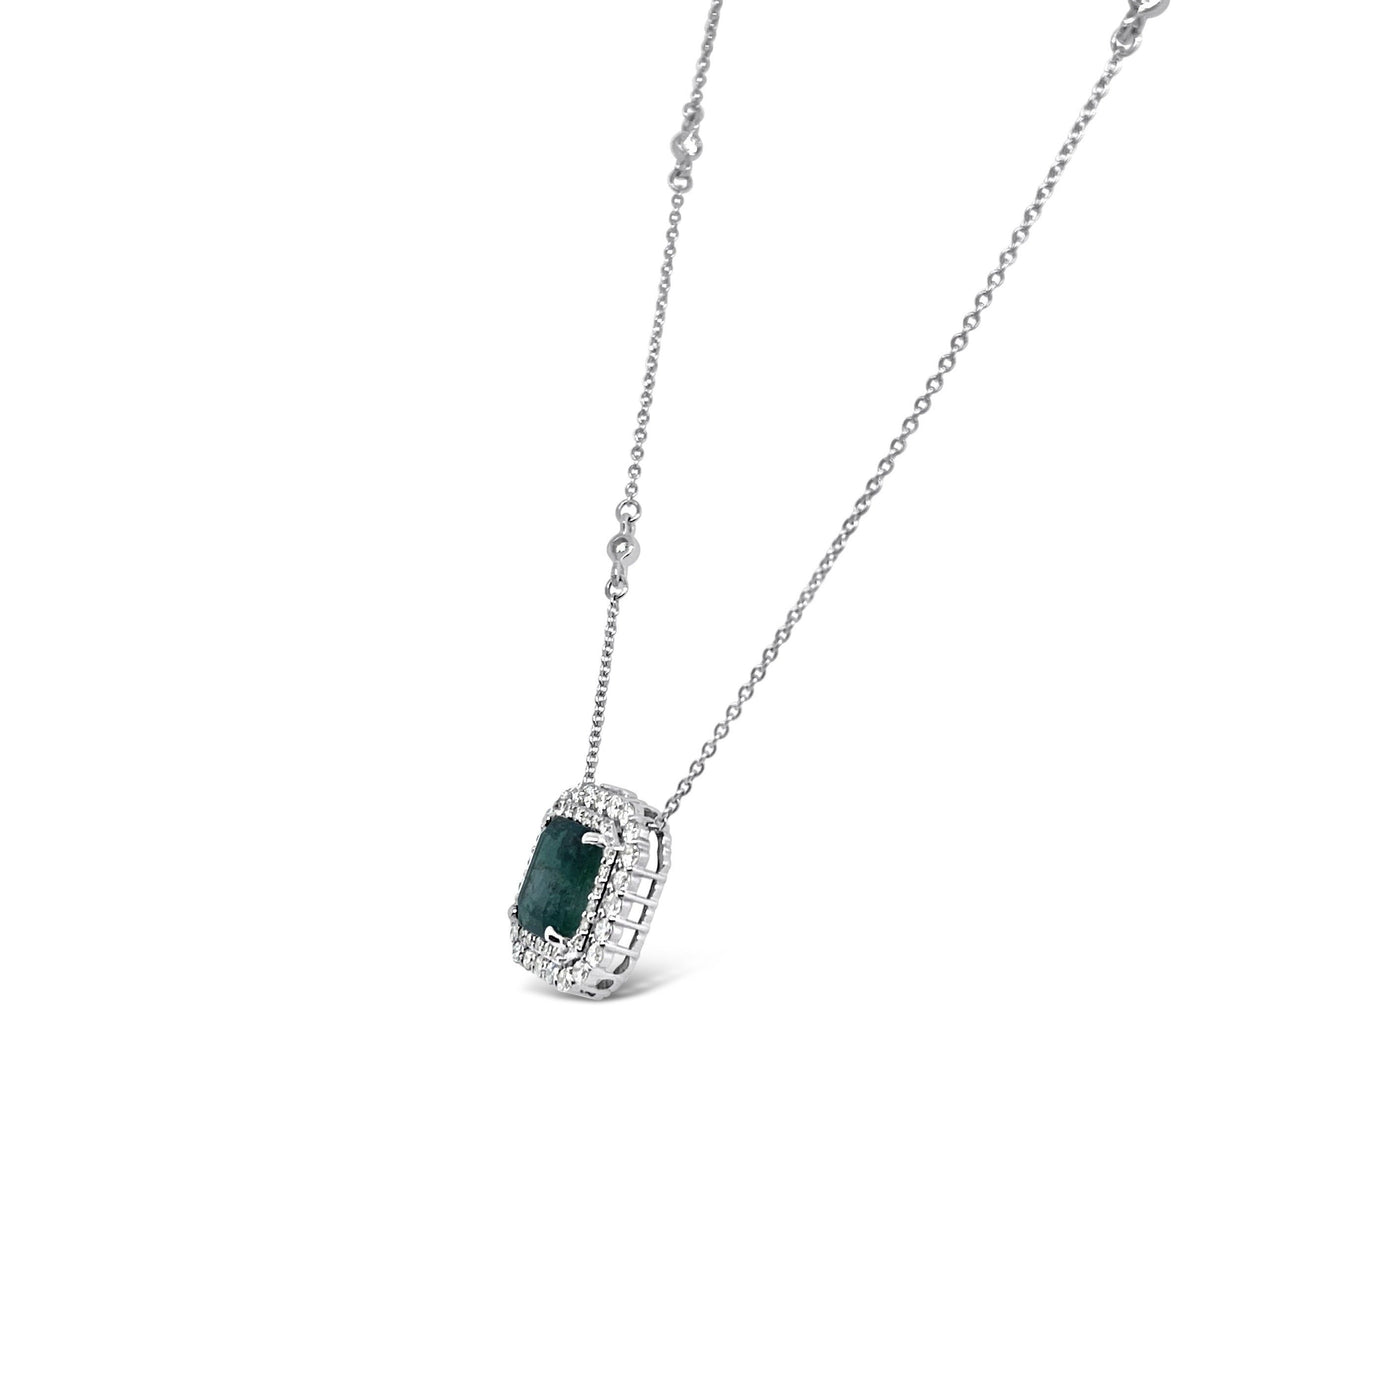 18CT White Gold Emerald and Diamond Pendant and Necklace